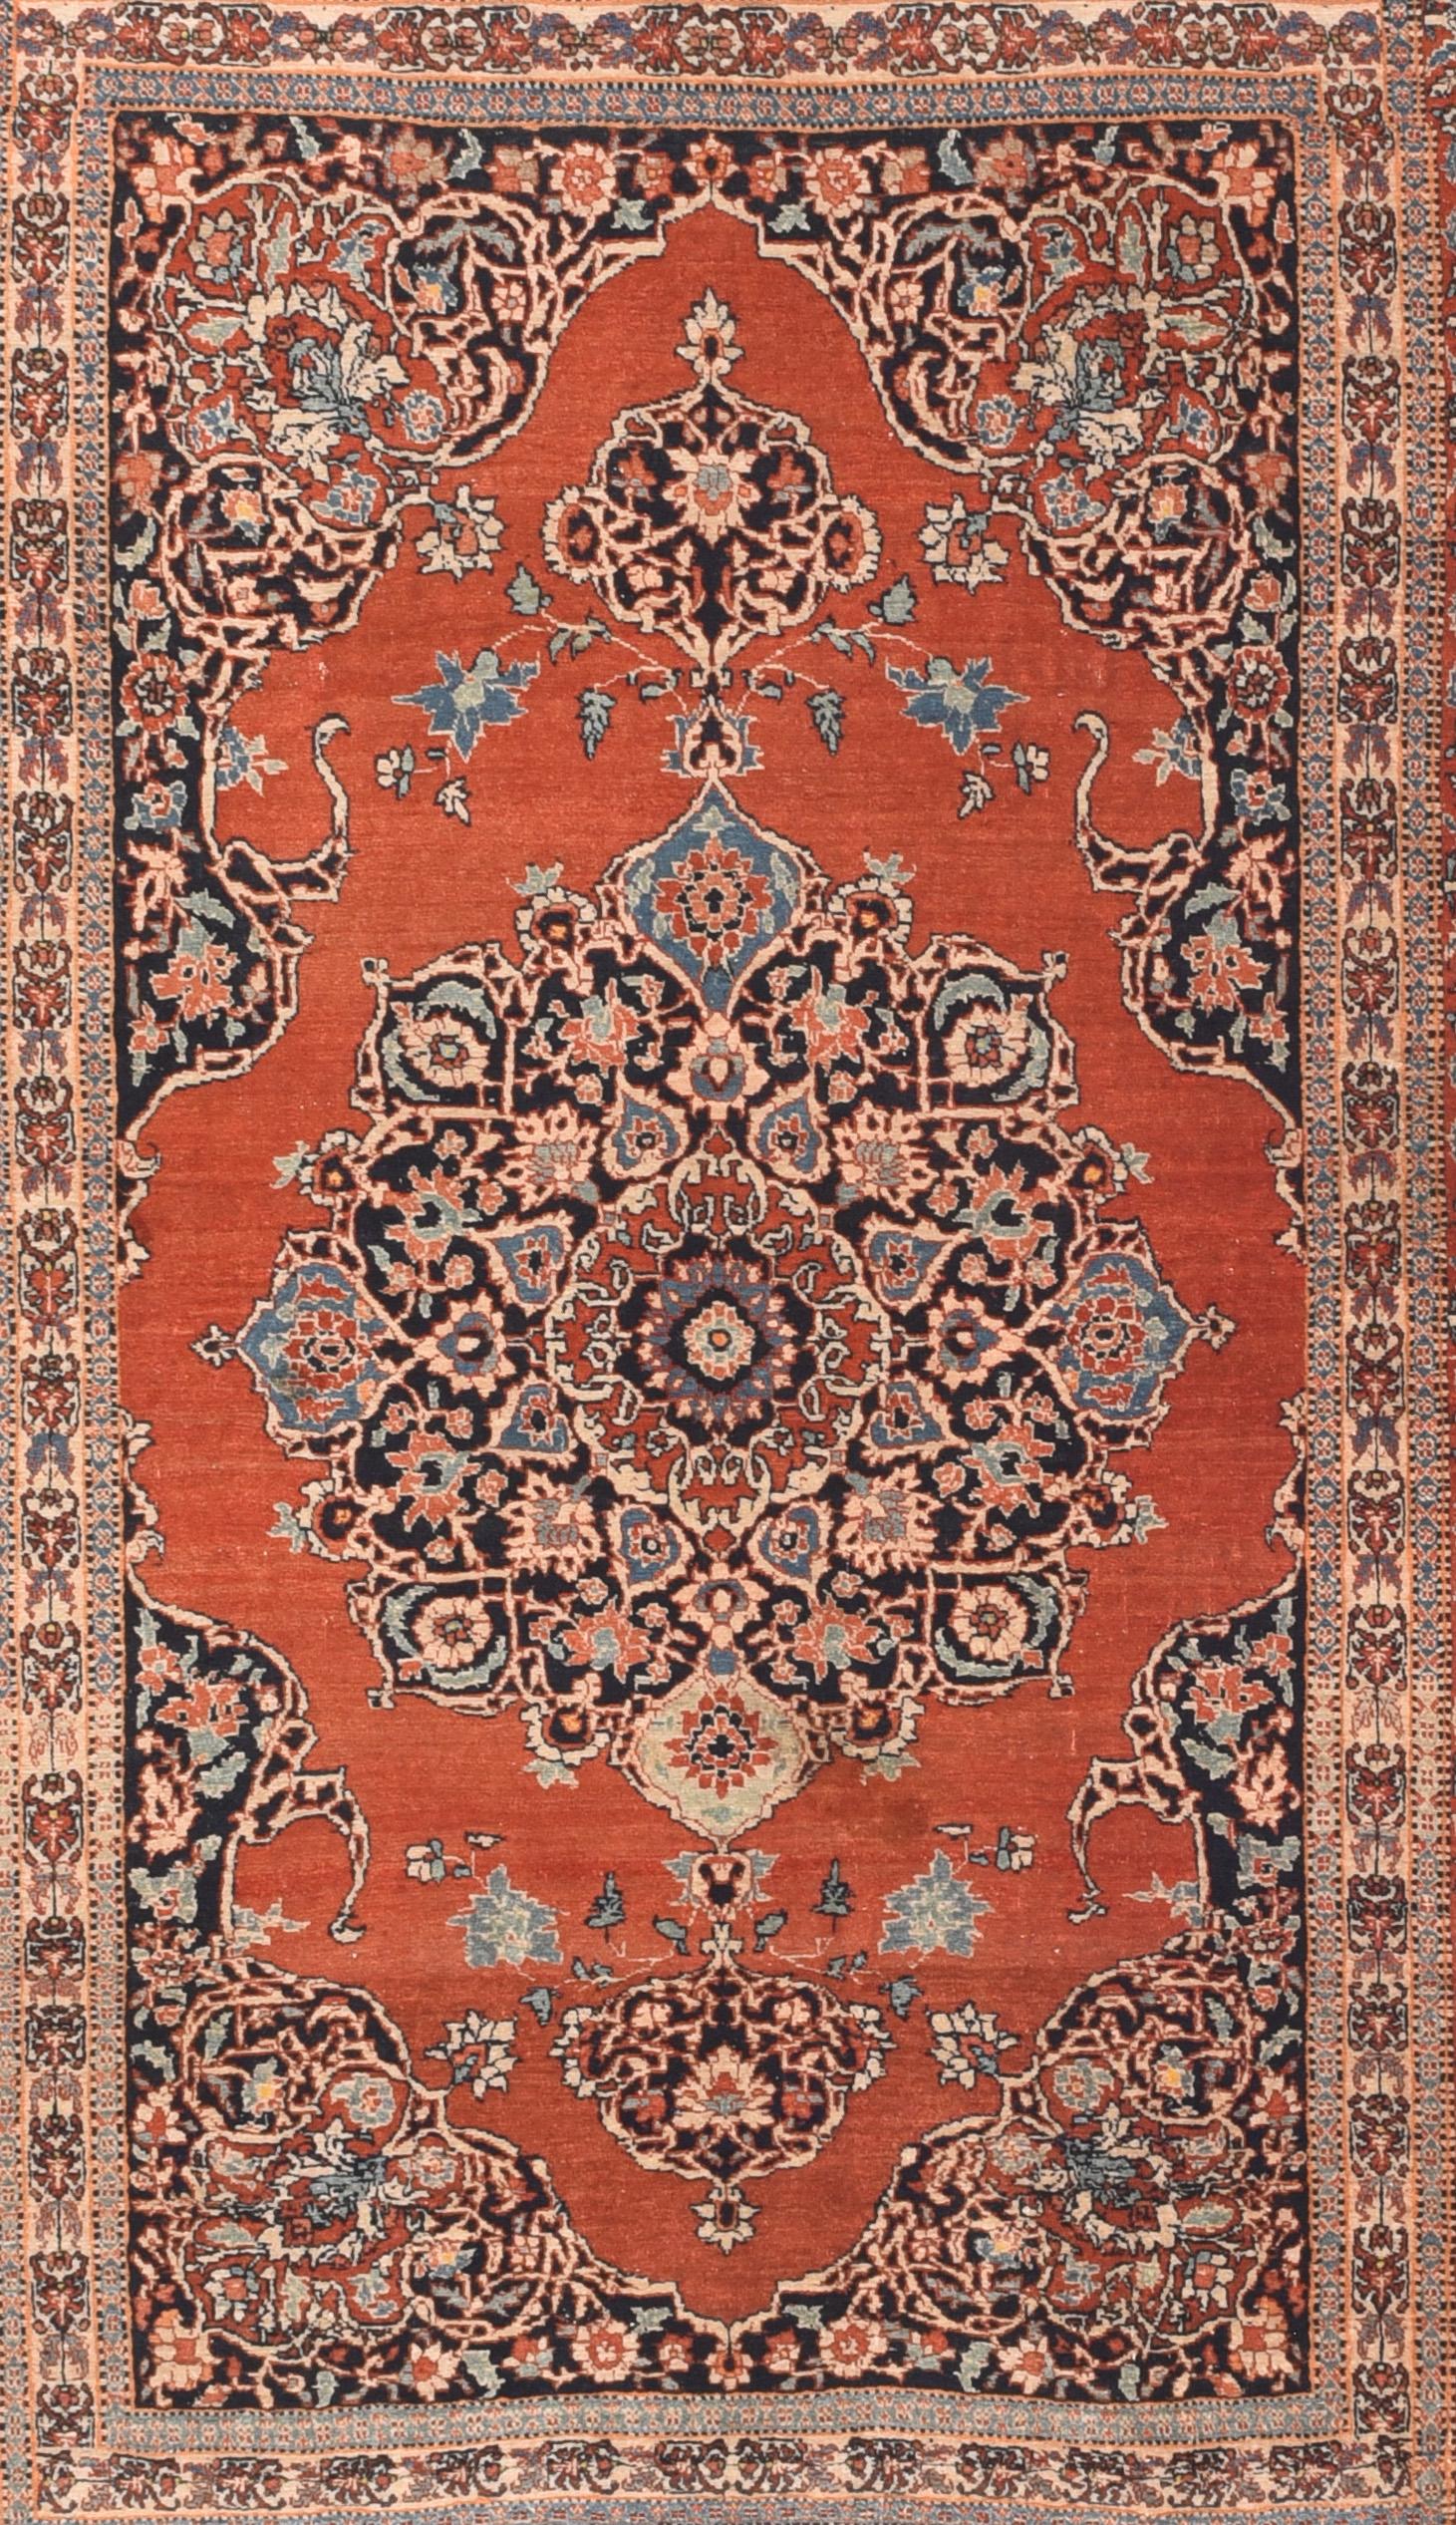 Antique Haji Jalili Tabriz Rug 4'4'' x 6'9''. A Tabriz rug/carpet is a type in the general category of Persian carpets.[from the city of Tabriz, the capital city of East Azarbaijan Province in north west of Iran totally populated by Azerbaijanis. It